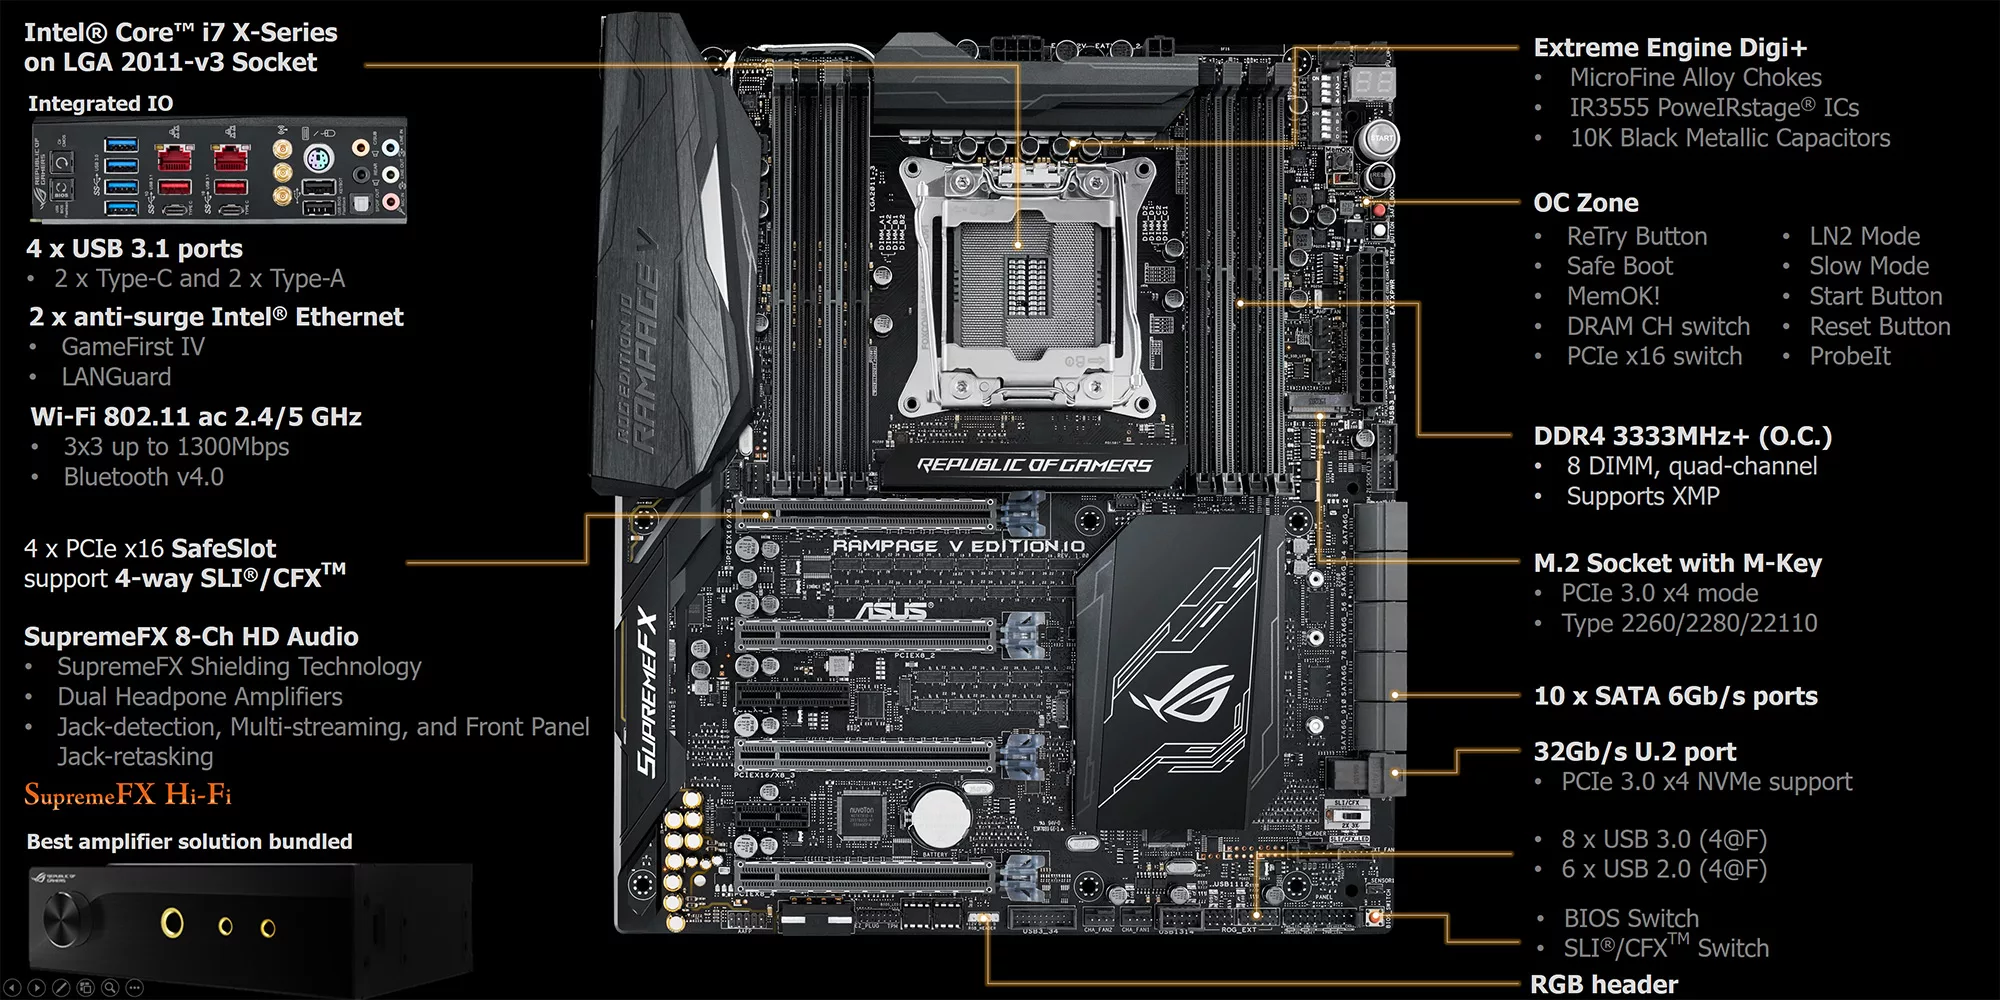 Rampage V Edition 10: What Goes Into the Ultimate Motherboard? | ROG - Republic  of Gamers Global